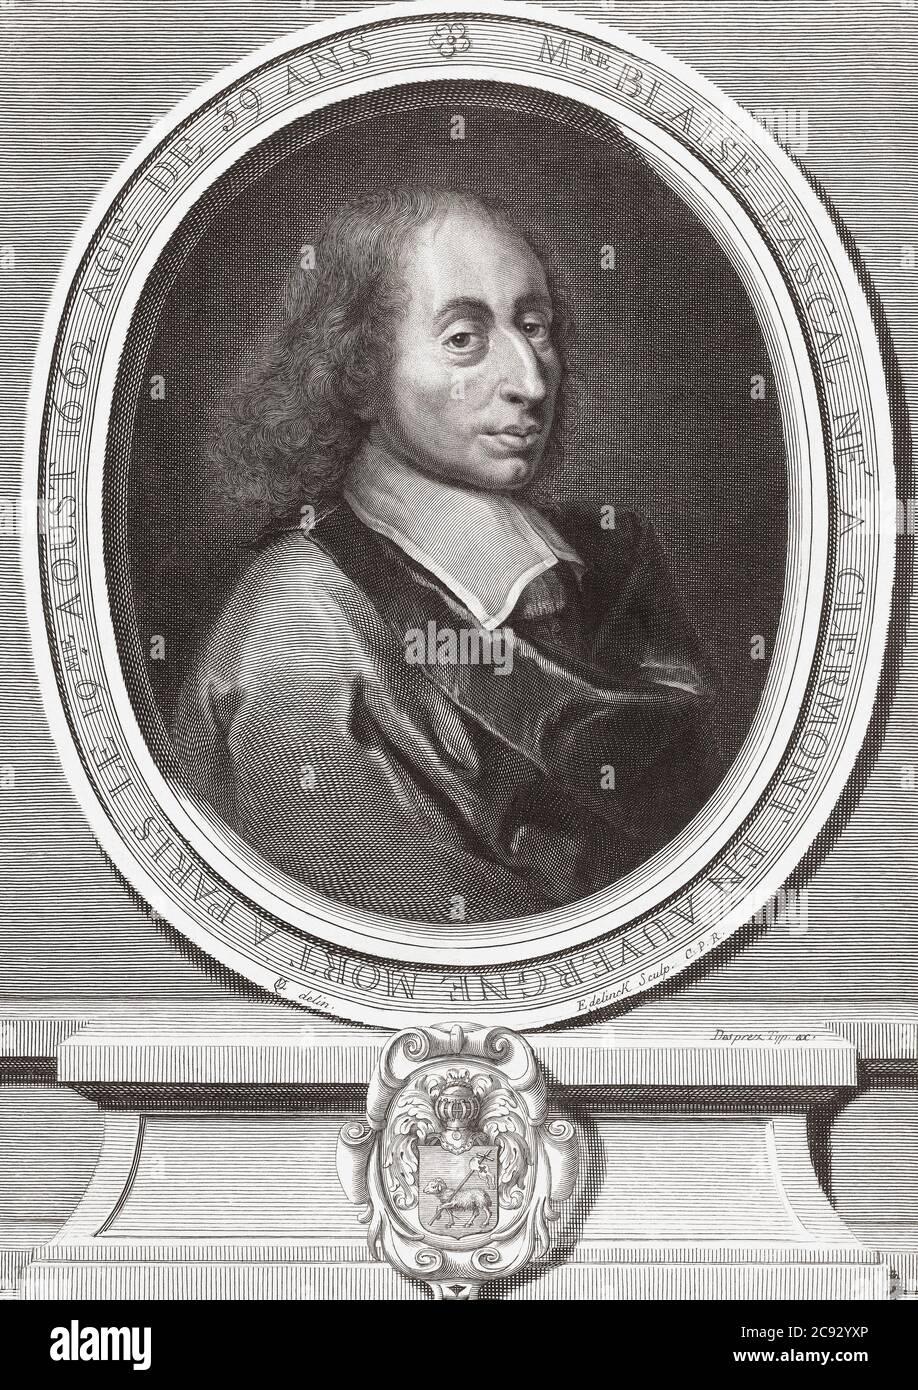 Blaise Pascal, 1623 - 1662. French mathematician, physicist, inventor, writer and Catholic theologian.  After a print by Flemish engraver and publisher Gerard Edelinck. Stock Photo